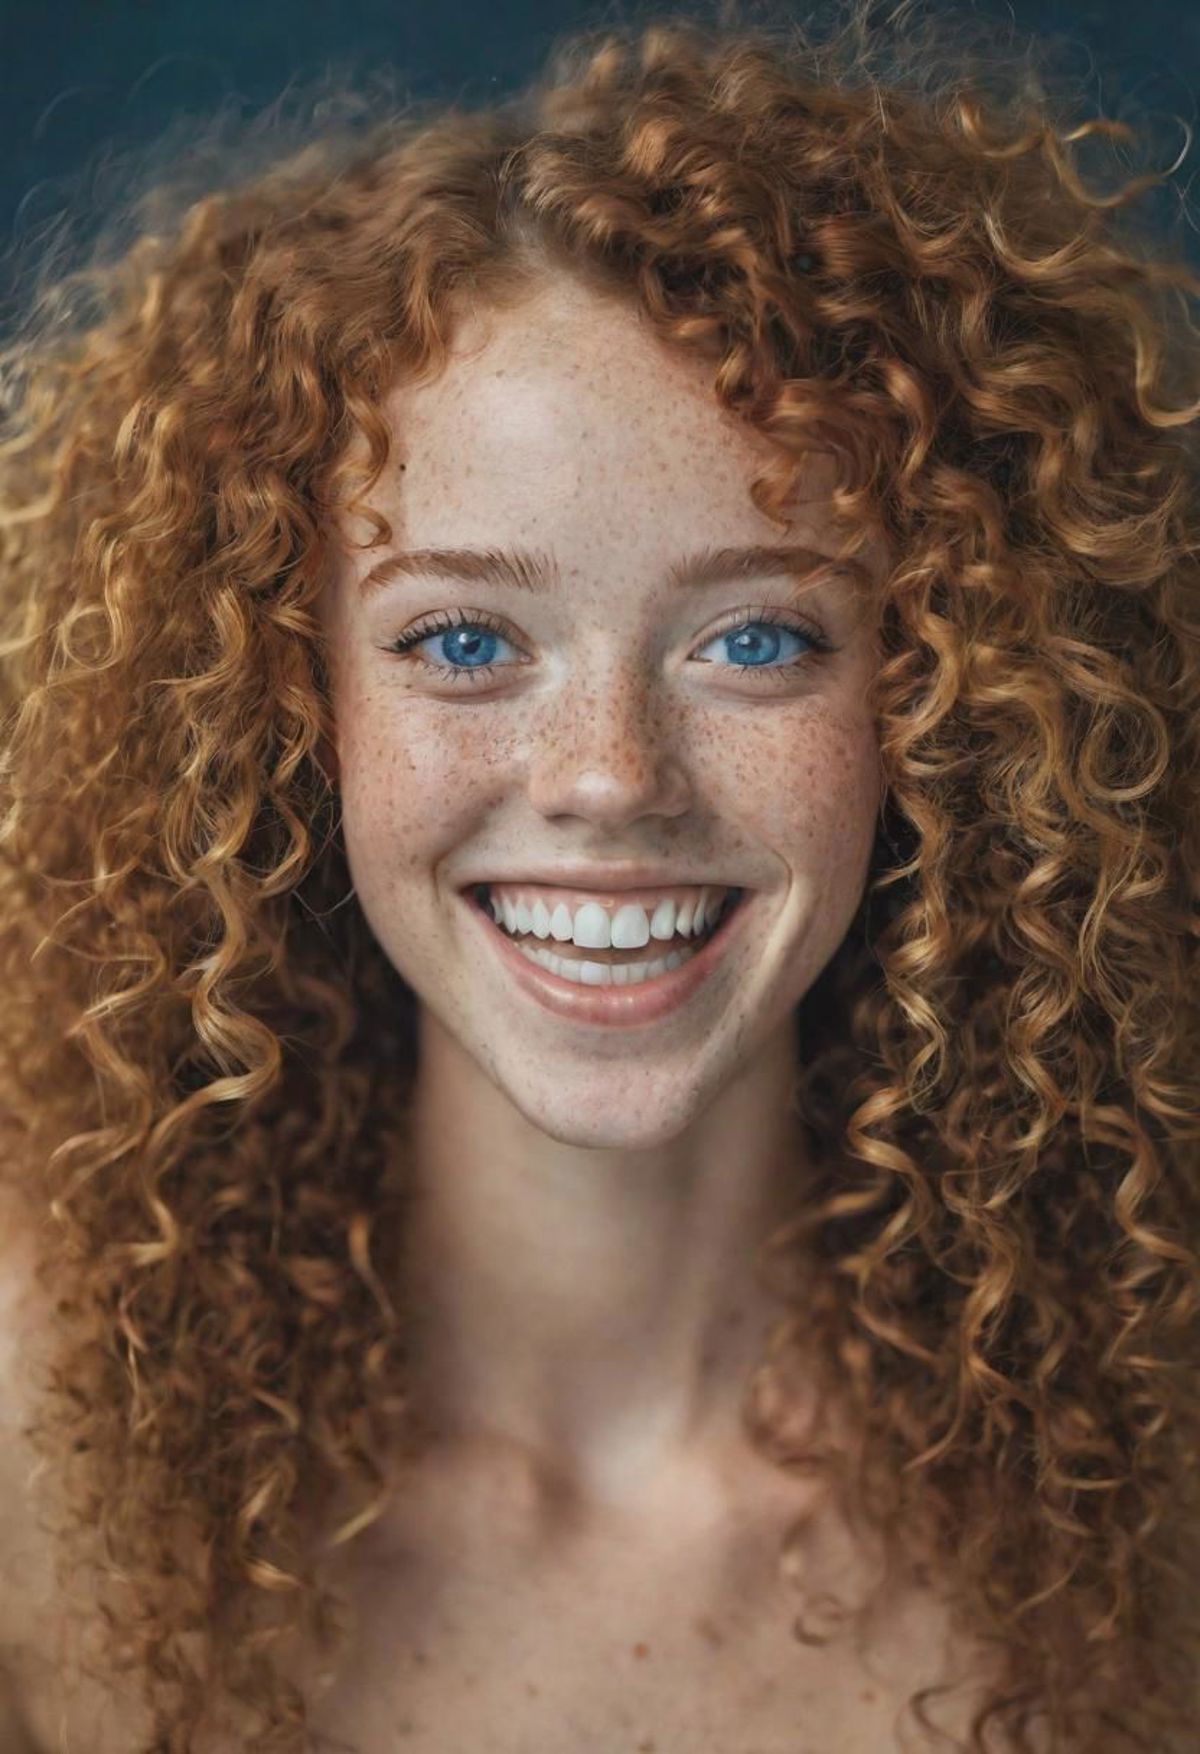 A smiling girl with freckles and curly red hair.